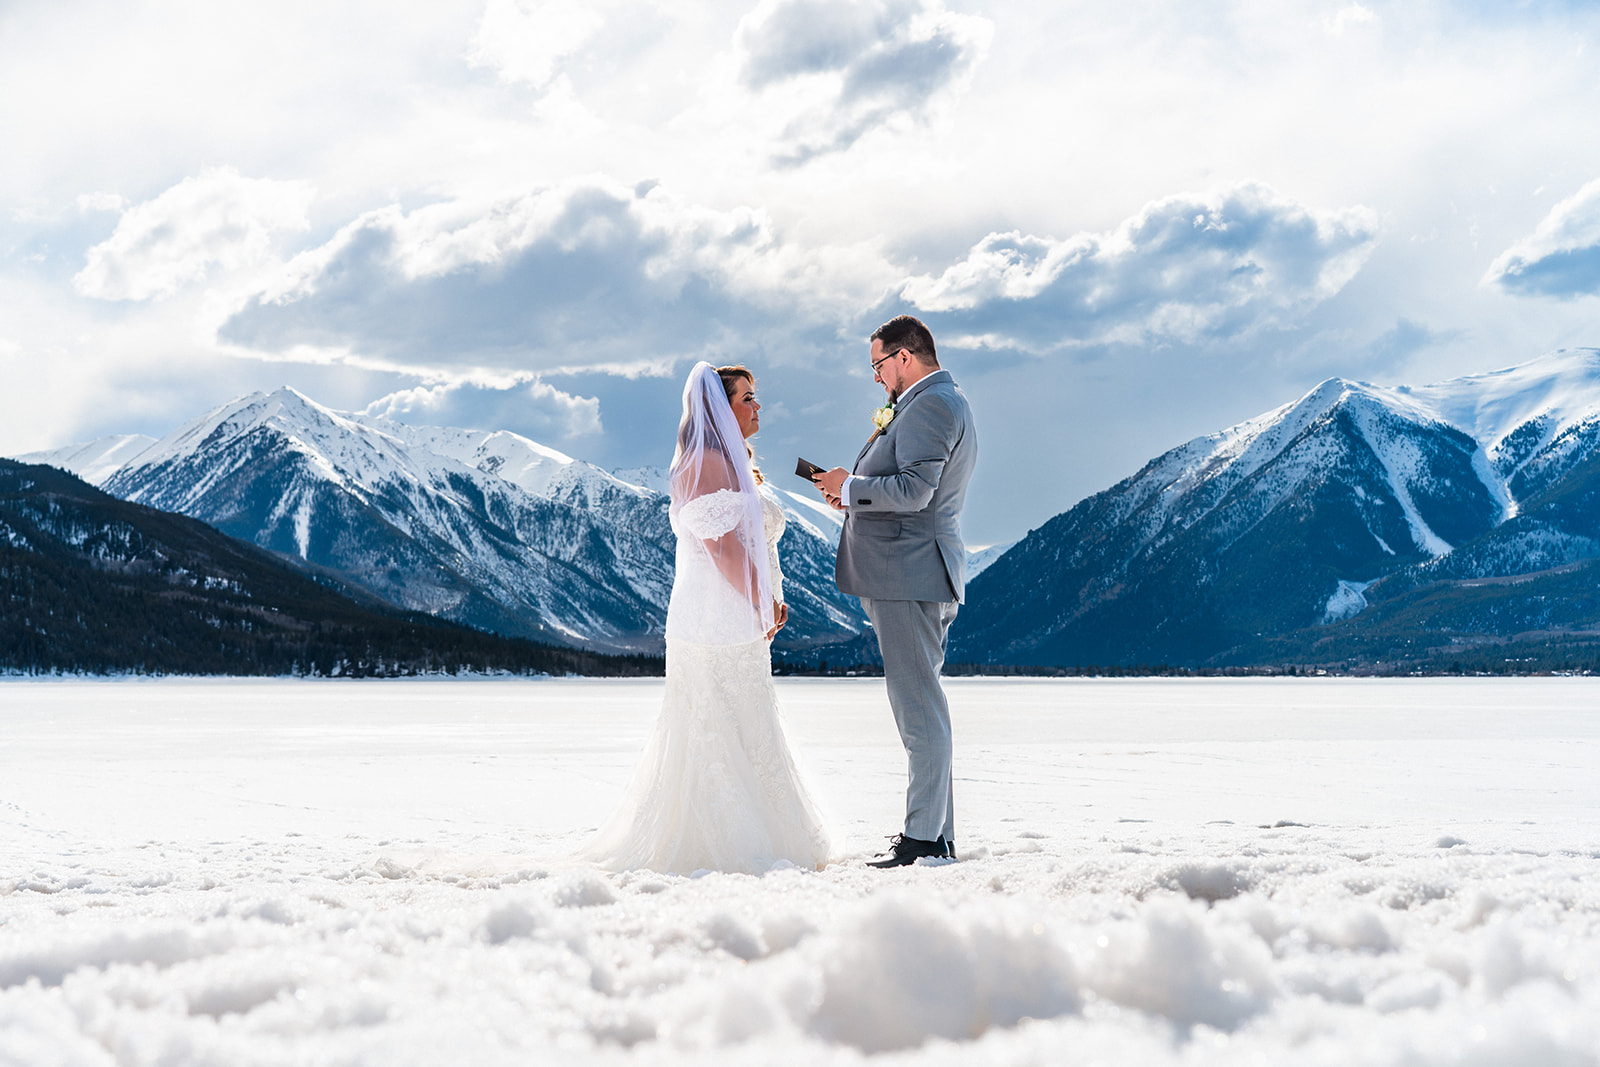 A bride and groom hold hands upon a snowy and frozen landscape with majestic mountains in the background on a sunny day beneath a cloudy sky during their Buena Vista elopement.